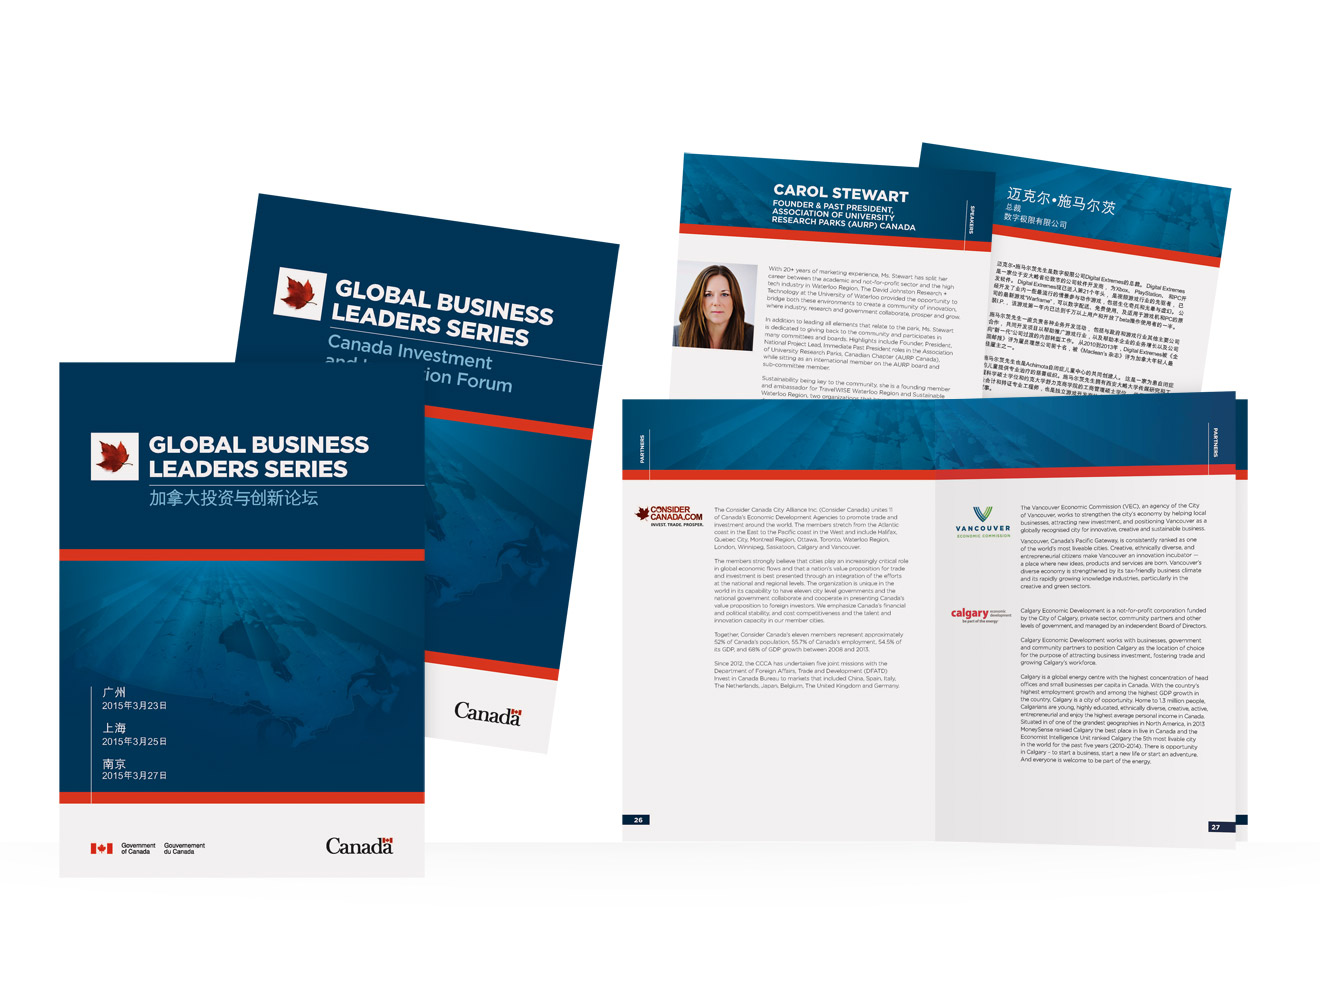 Global Business Leaders booklets in multiple languages and interior spread